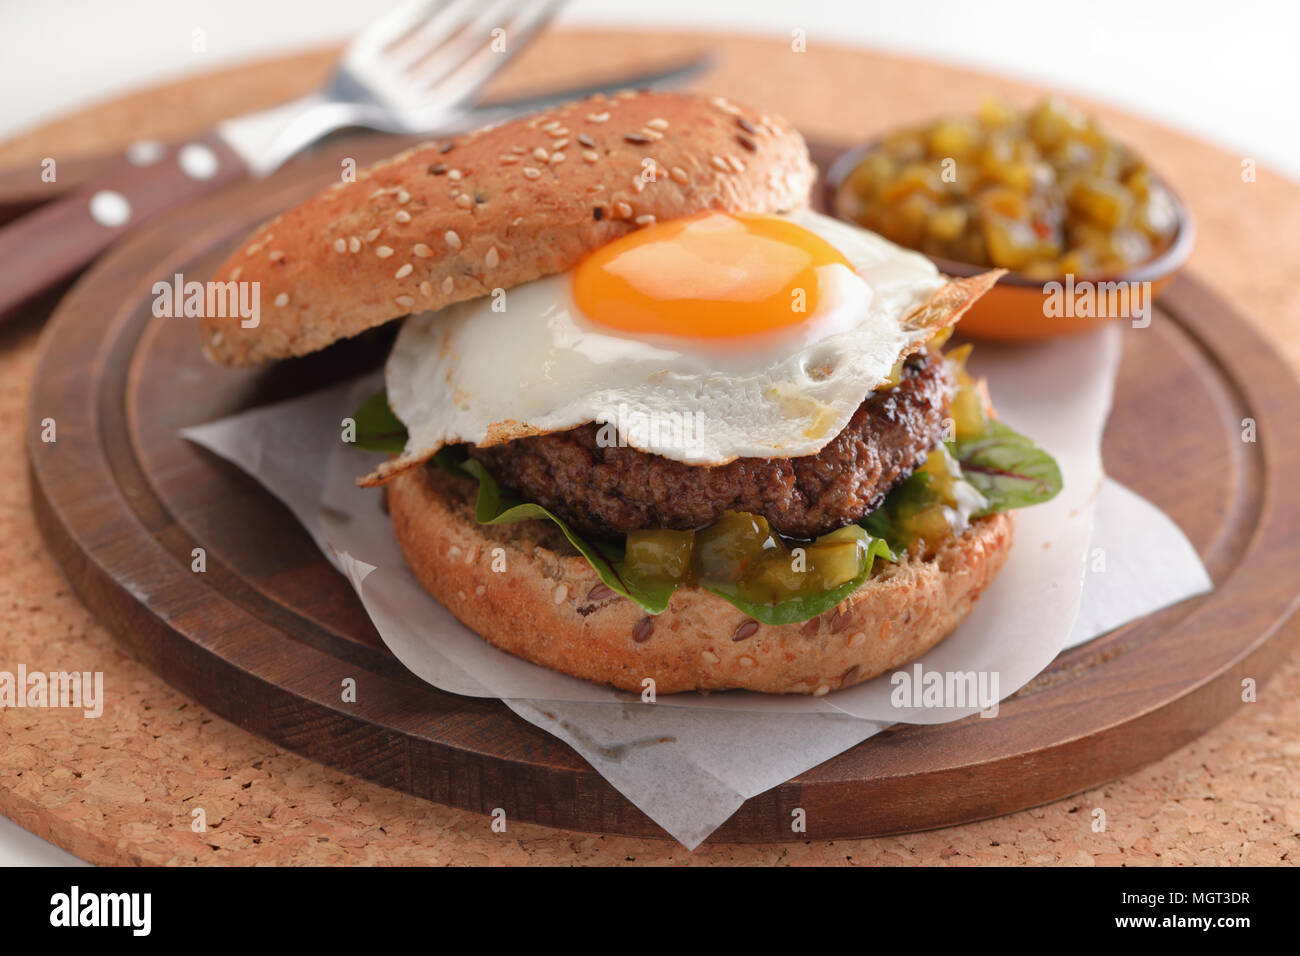 Hamburger with fried egg and gherkin salad Stock Photo